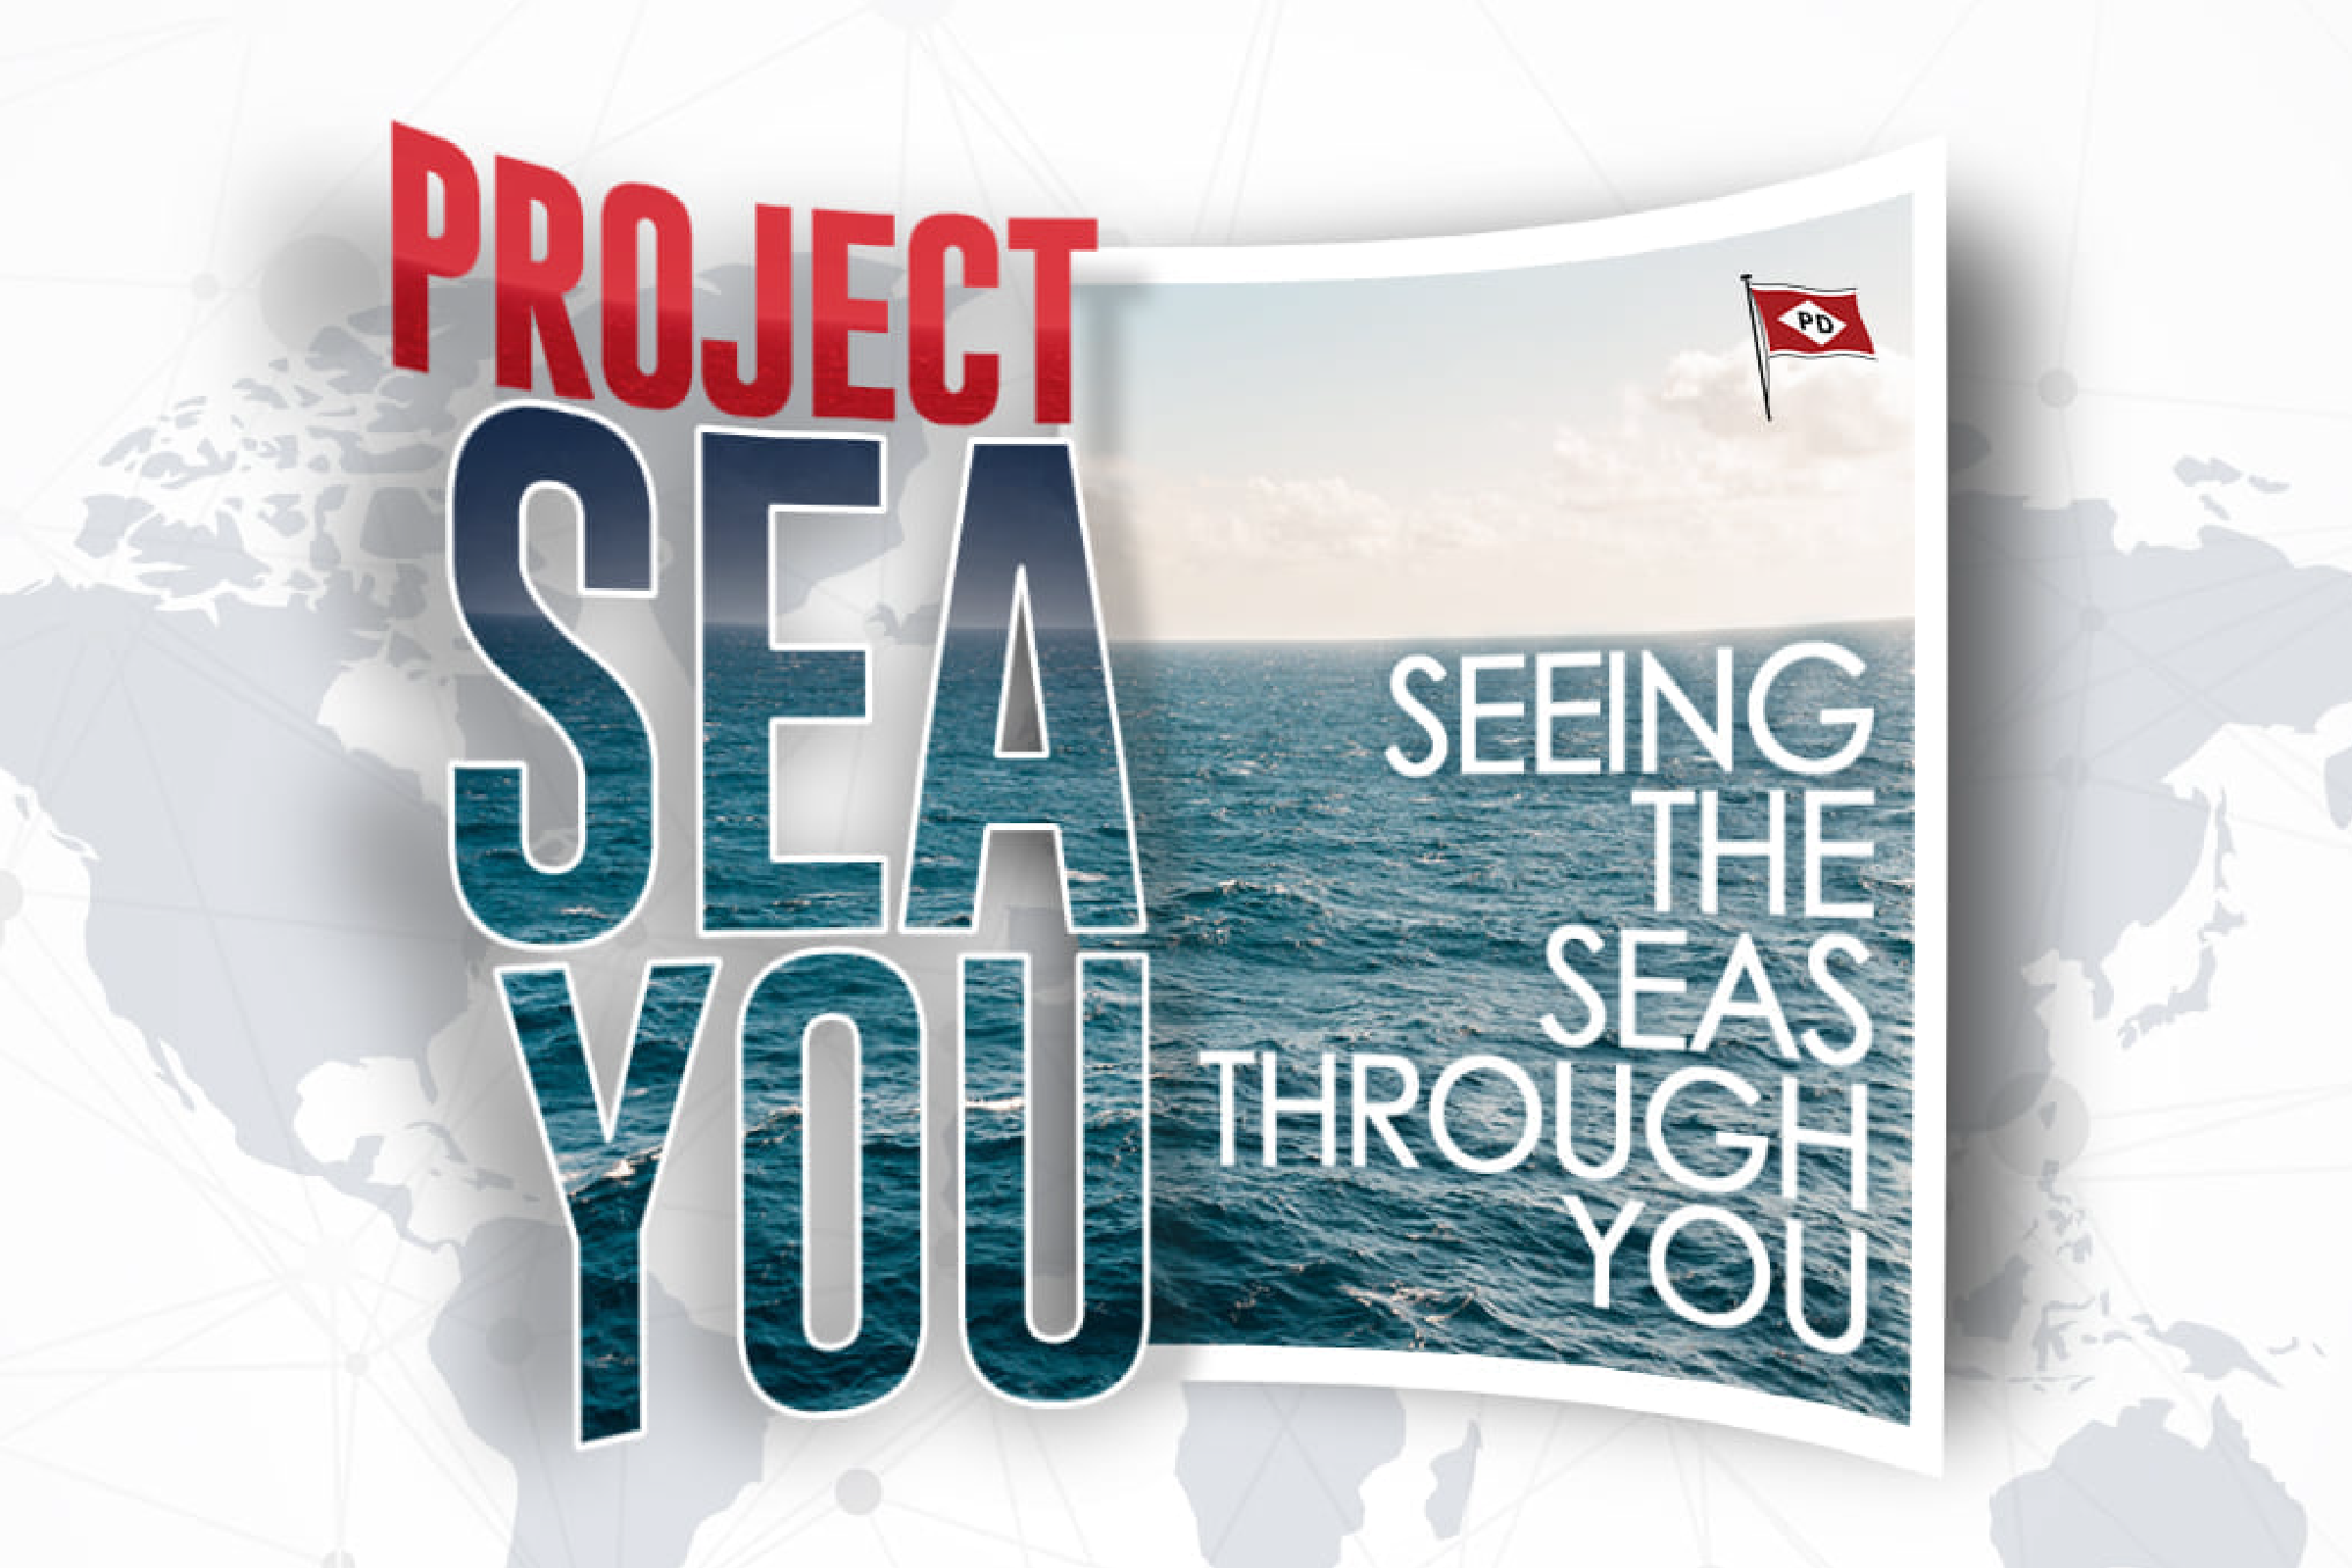 PROJECT SEA YOU 2020 GALLERY